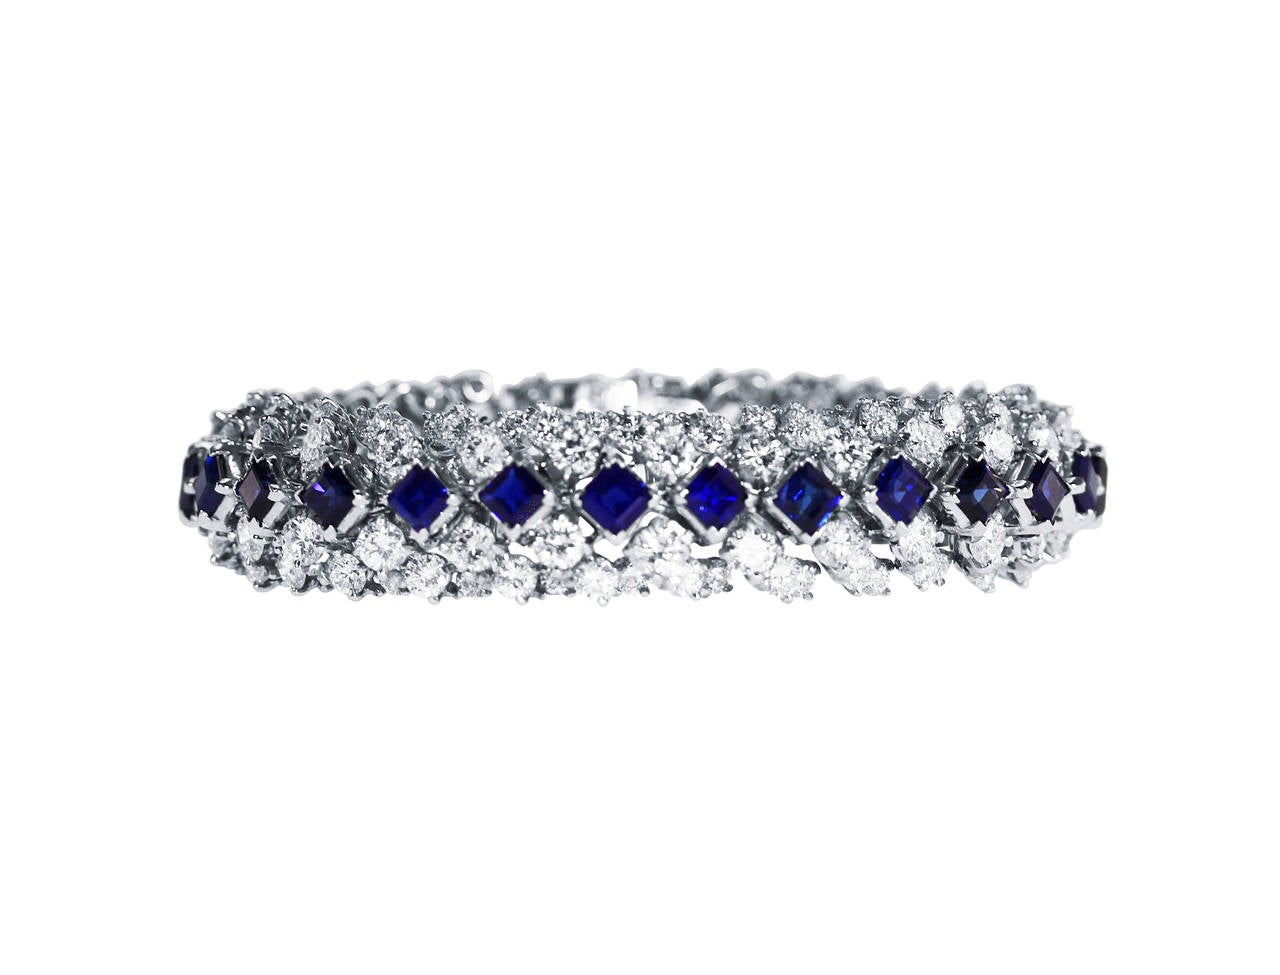 This stunning an highly flexible platinum, sapphire and diamond bracelet is by Oscar Heyman & Brothers, circa 1965, the highly articulated strap set down the center with 27 square-cut sapphires weighing 18.96 carats, flanked on either side with 162